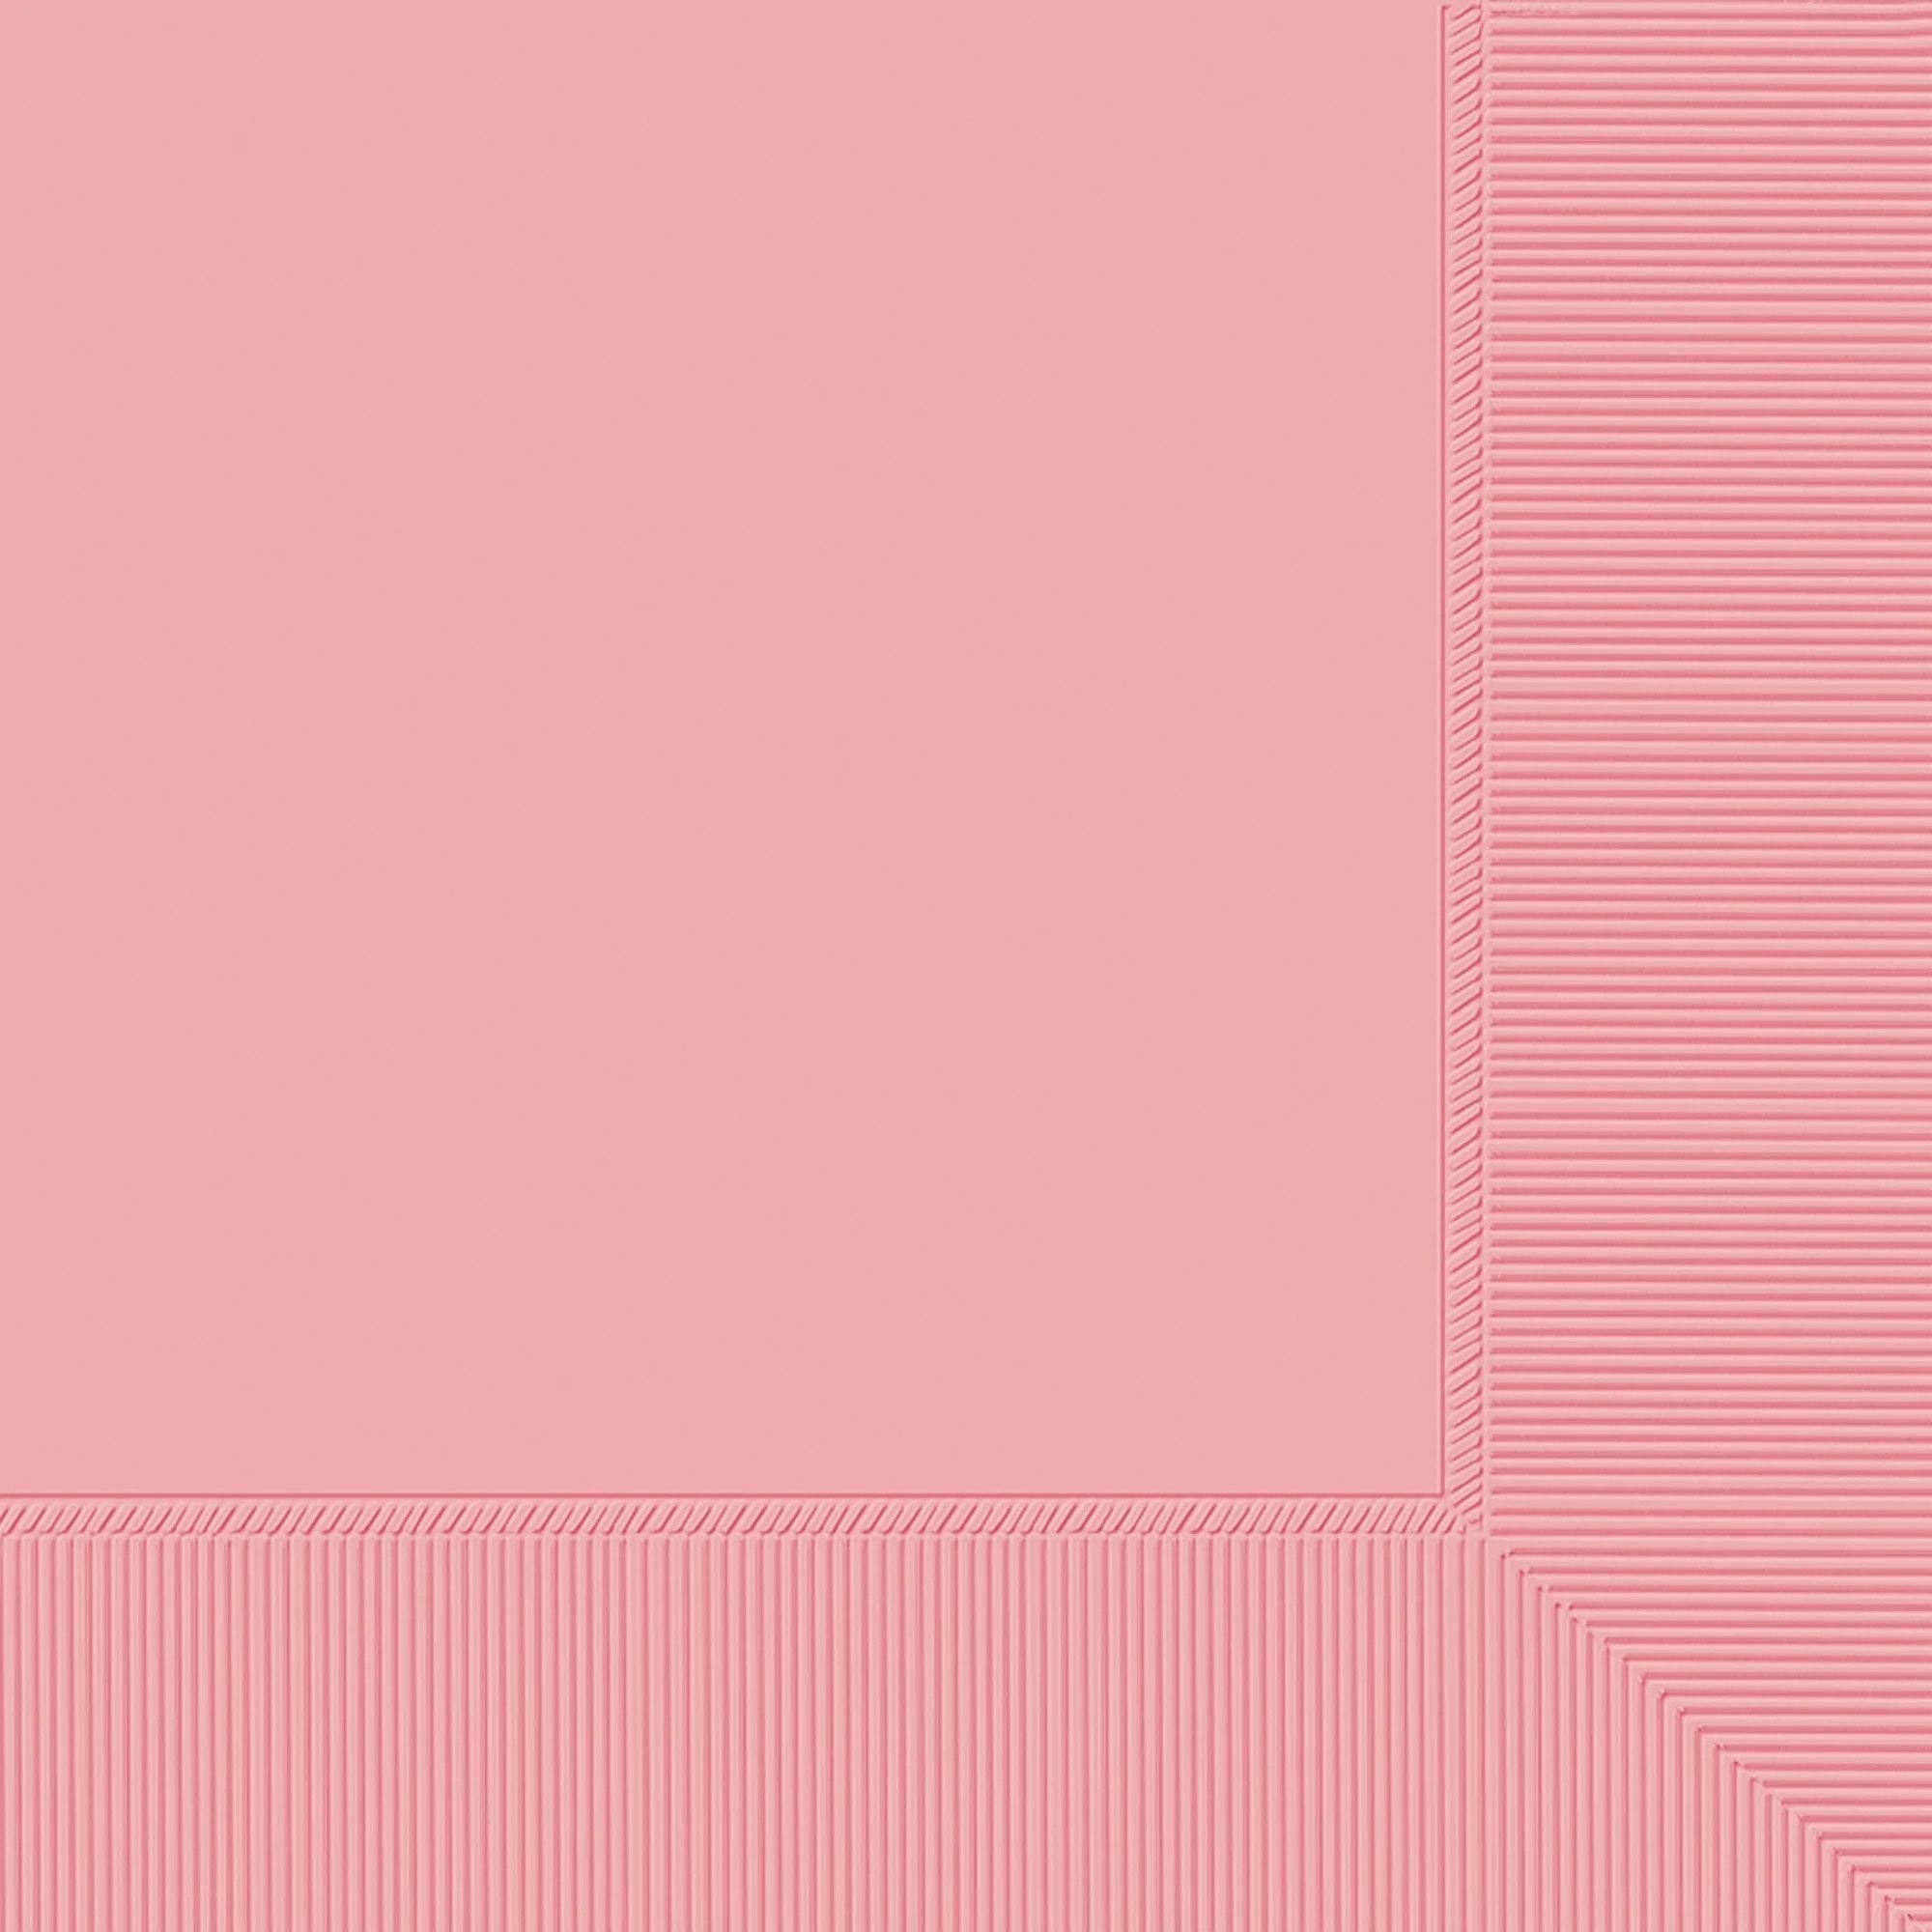 Amscan BASIC New Pink - Luncheon Napkins, 100 Ct.